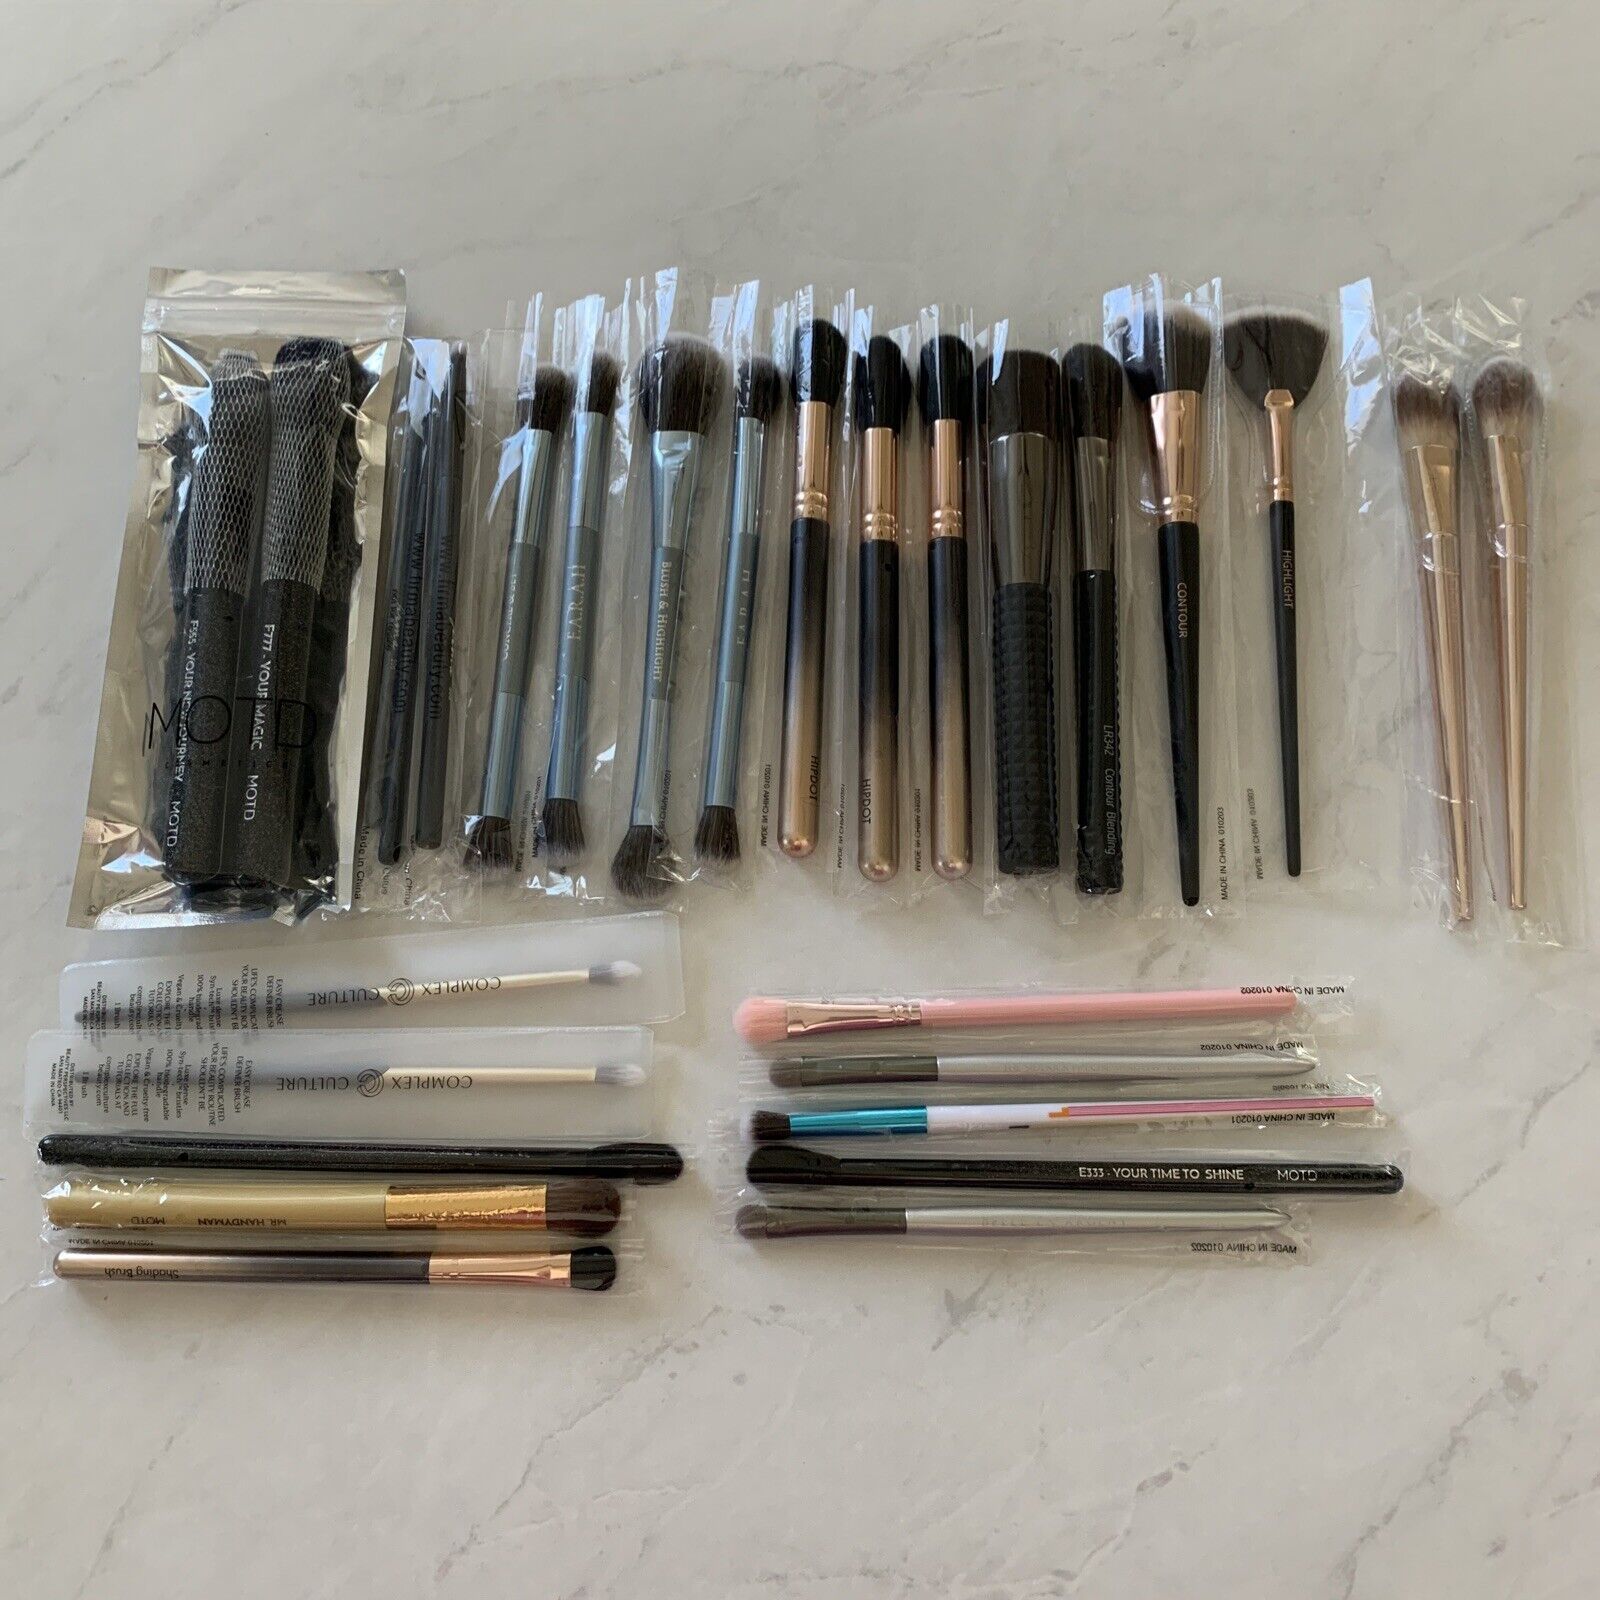 Lot of 25 Makeup Brushes Various Brands + Wholesale Resale Stock Up Gifts  *B19 Unbranded Makeup Brushes